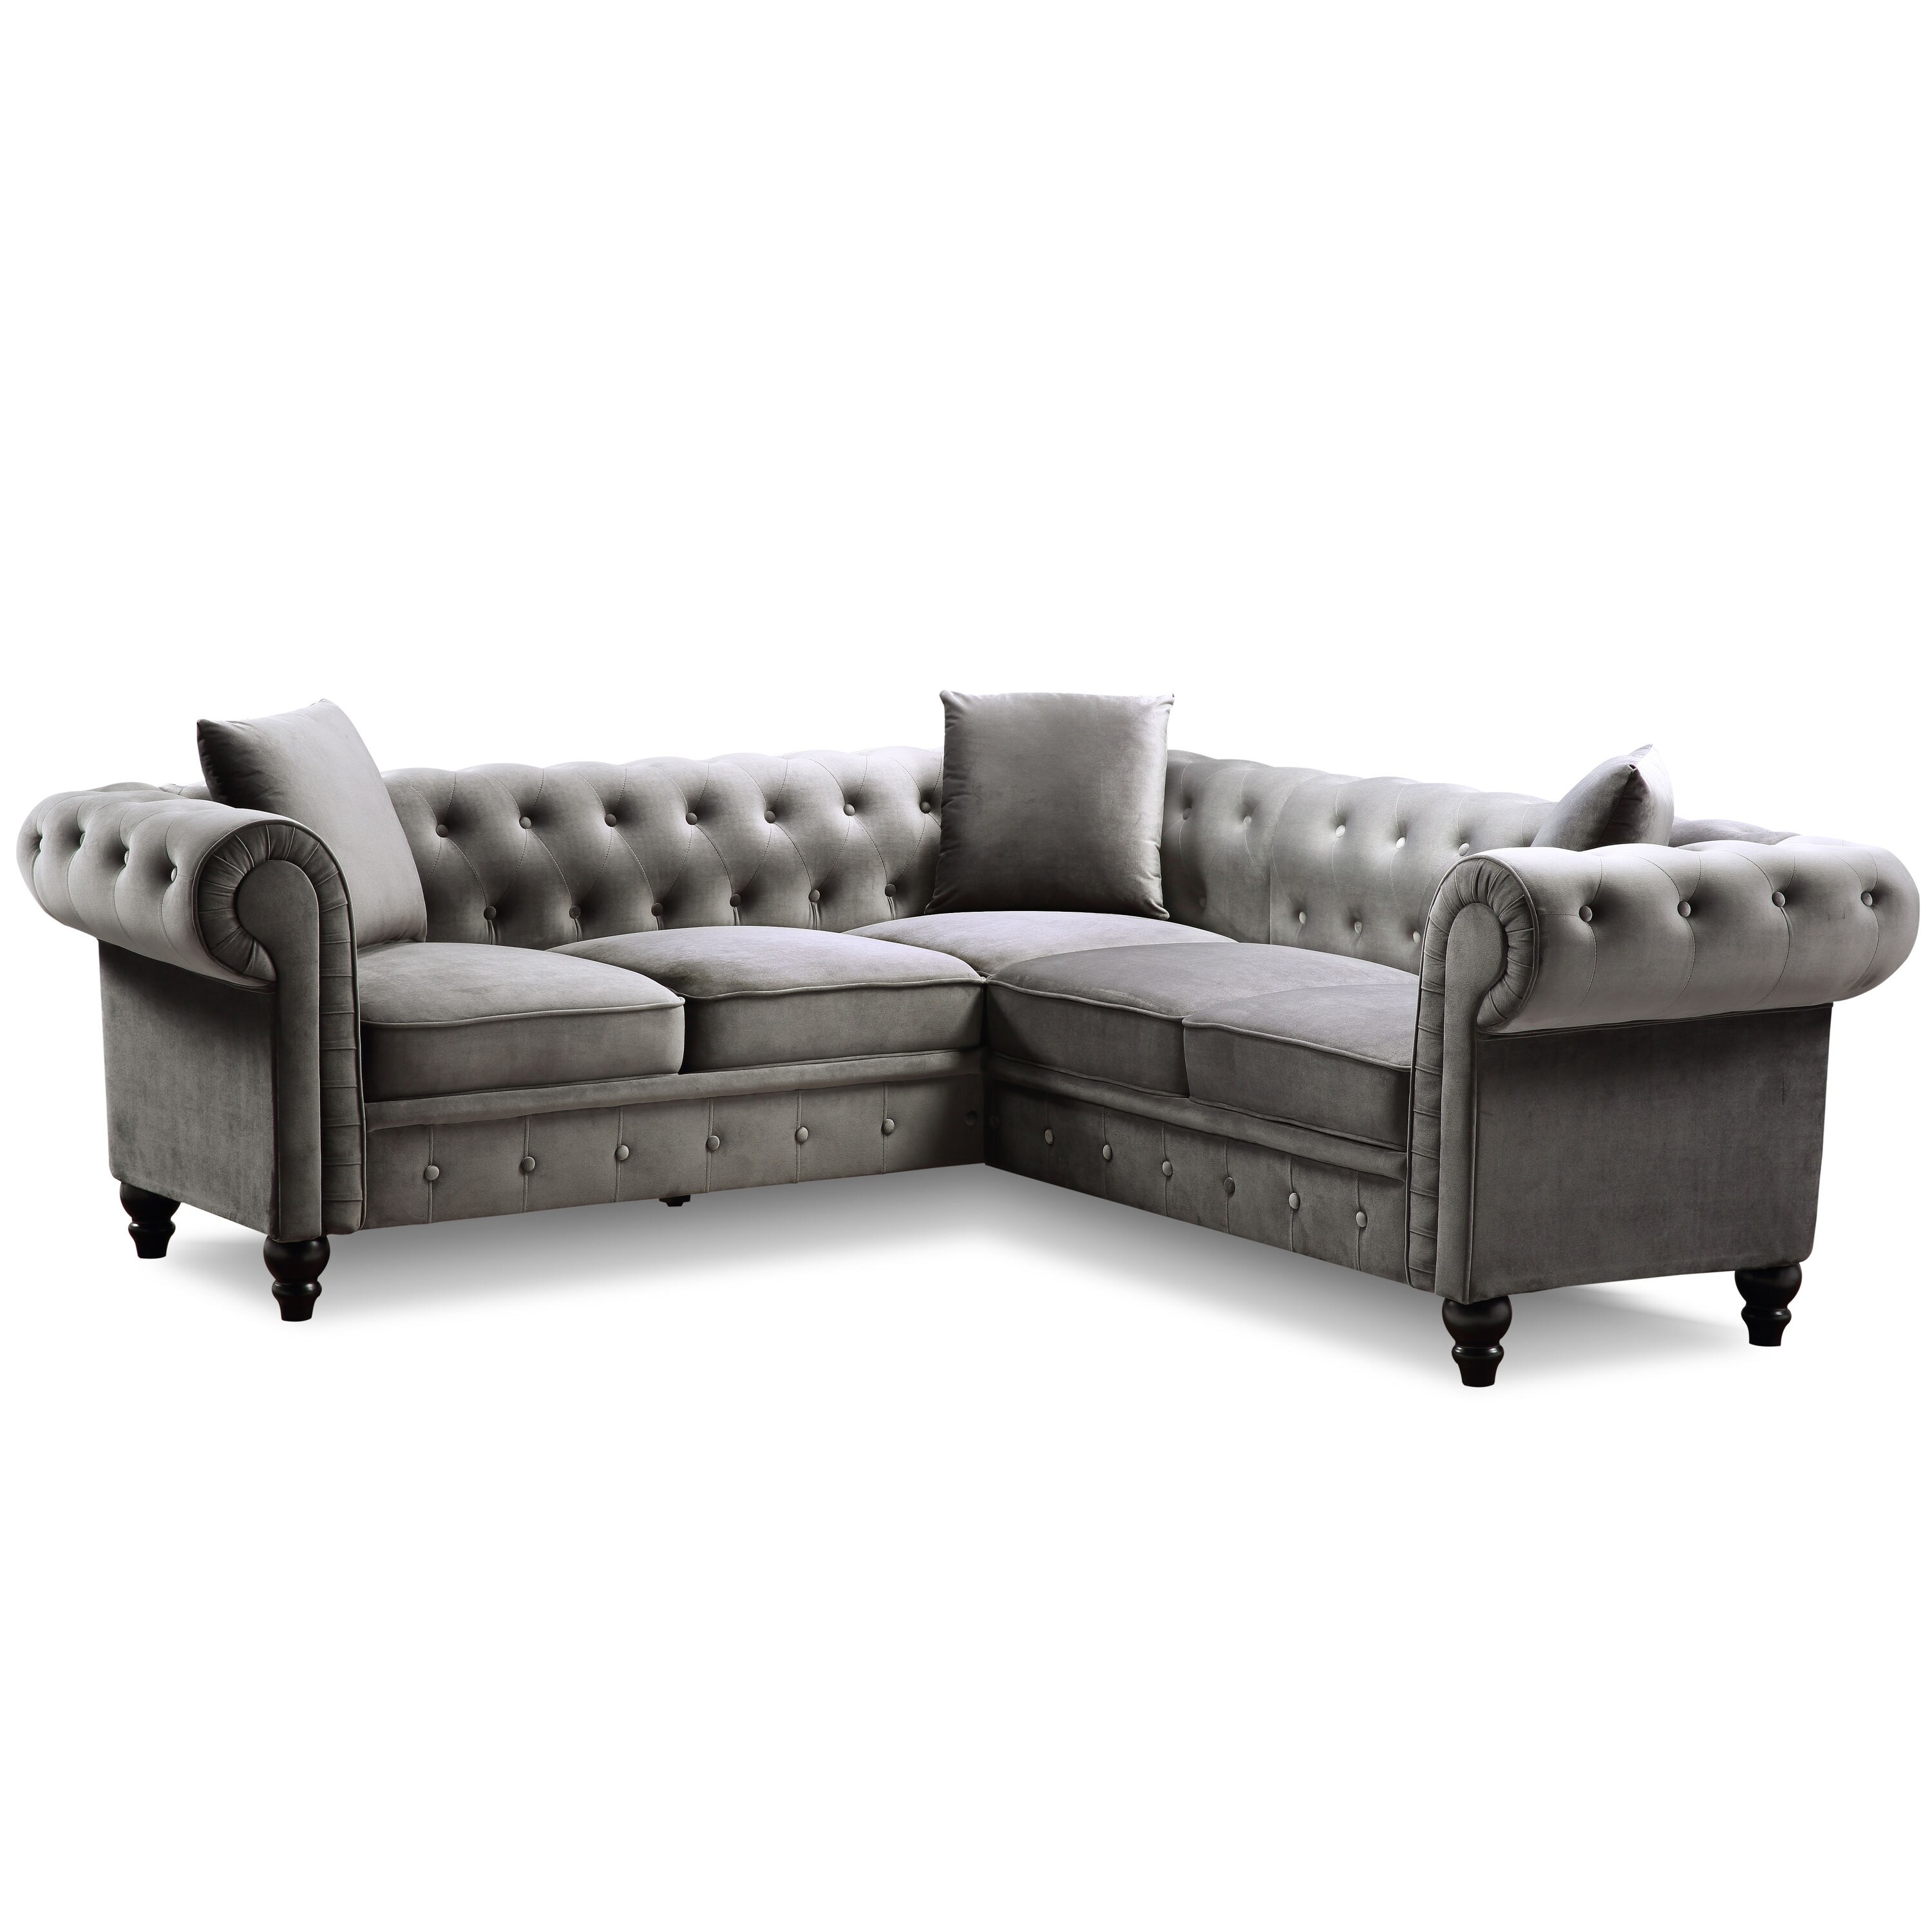 CASAINC 85-in Modern Grey Microfiber Sofa in the Couches, Sofas